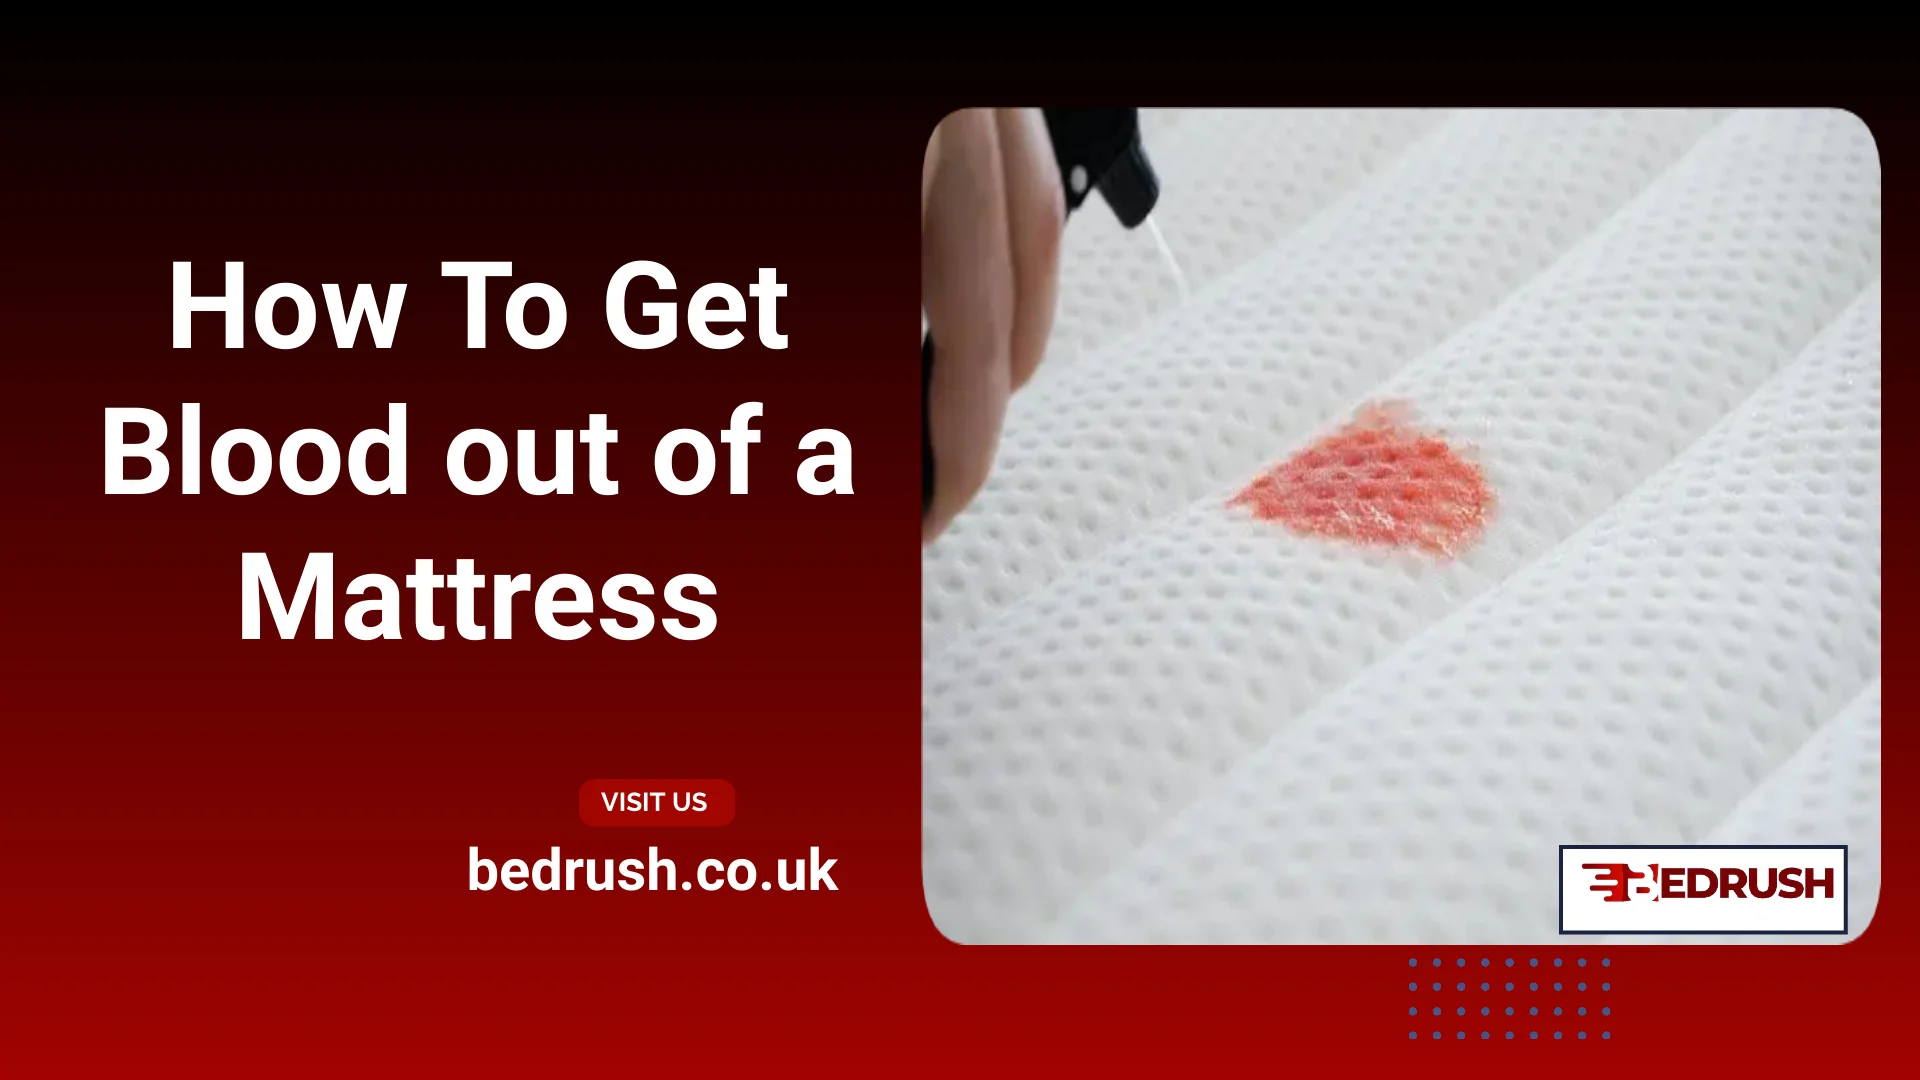 How To Get Blood out of a Mattress